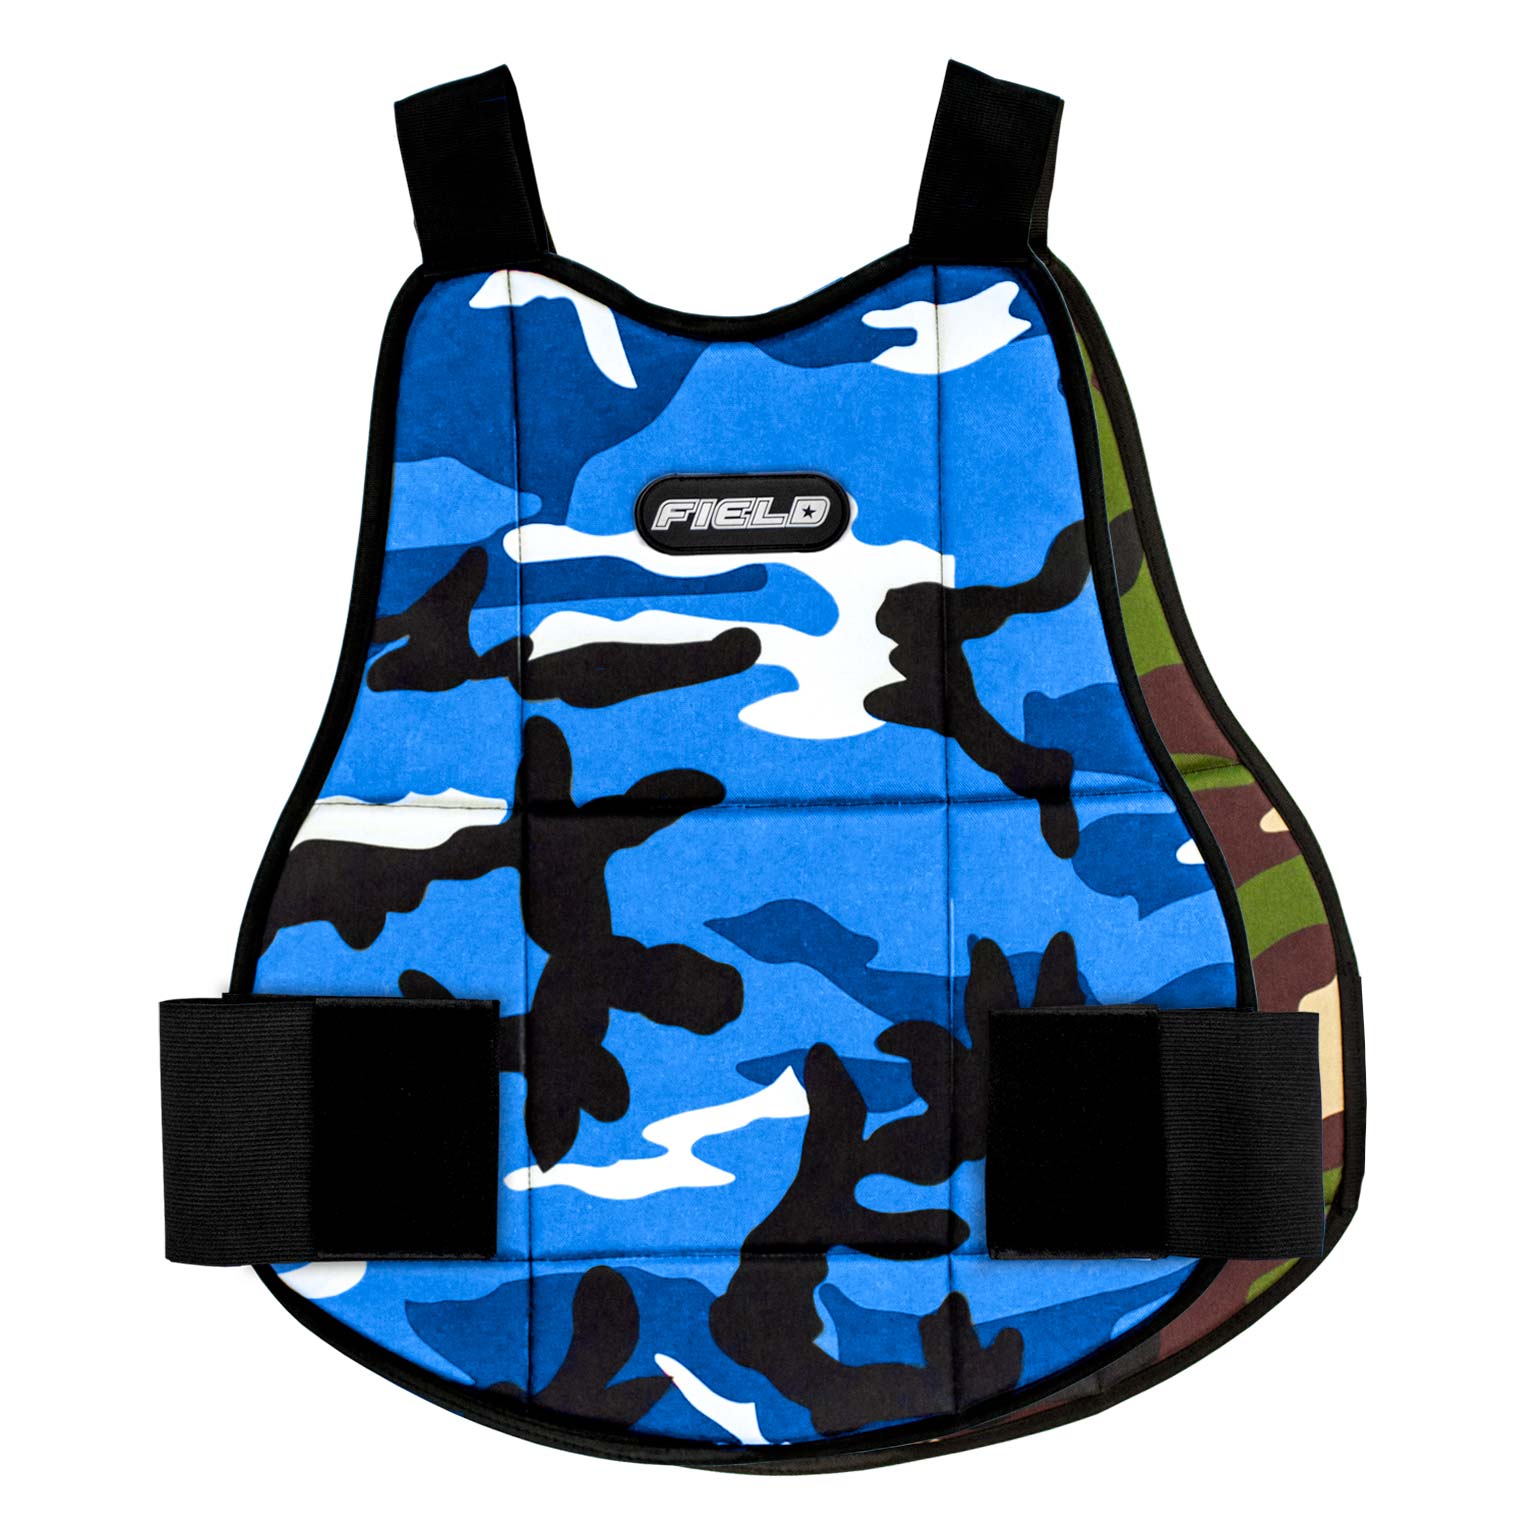 Reversible Chest Protector